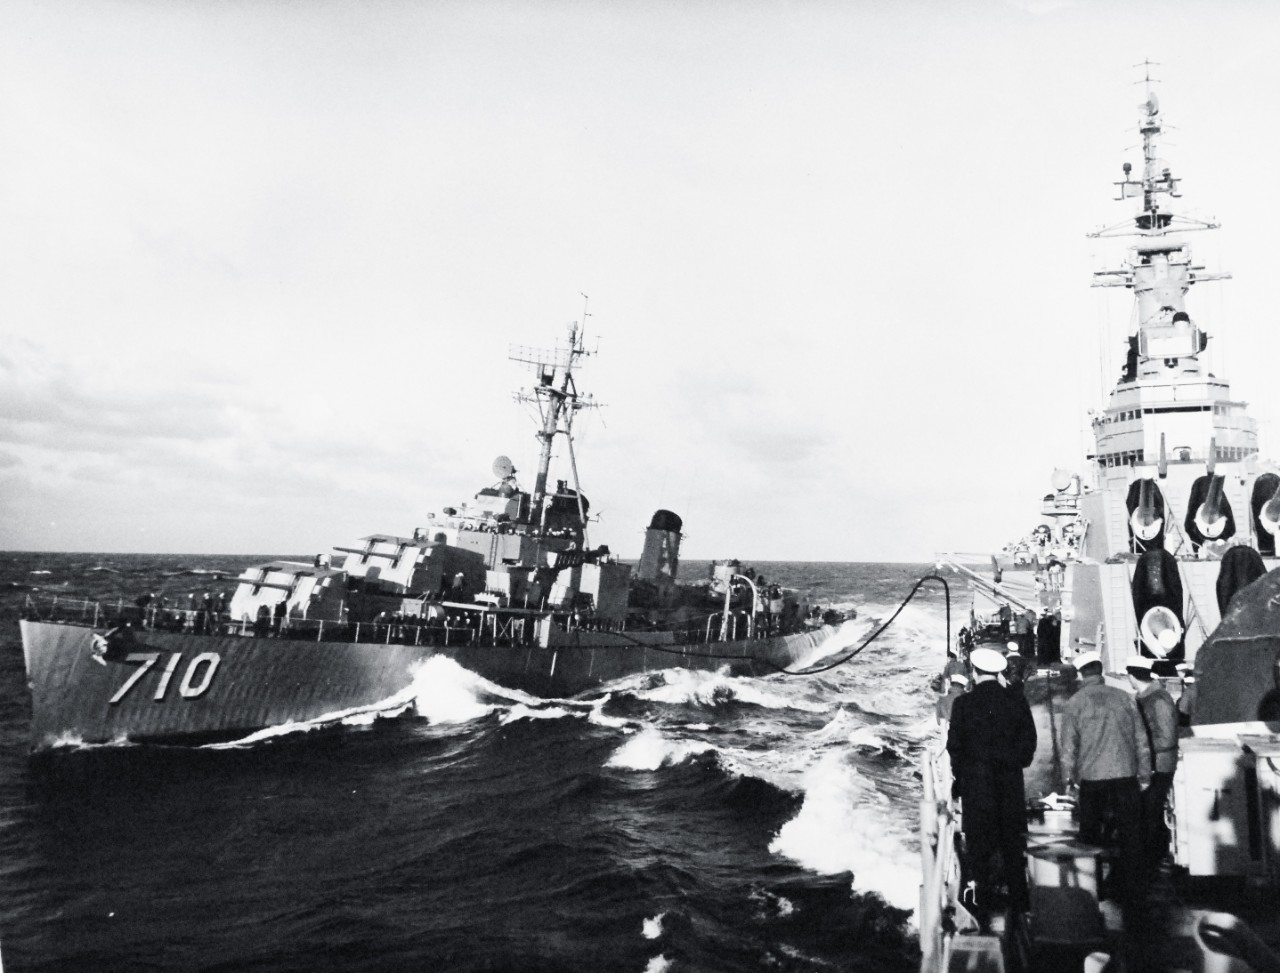 330-PS-1132:   USS Newport News (CA-148), February 1952.    Combined US-British Exercises in the Mediterranean.  USS Gearing (DD 710) fueling from Sixth Fleet Flagship USS Newport News (CA-148) during combined U.S. and British Naval Exercises February 12-13, 1952, in the Mediterranean.   Also at National Archives as USN 708112.   Official U.S. Navy Photograph, now in the collections of the National Archives.  (2015/06/30).   